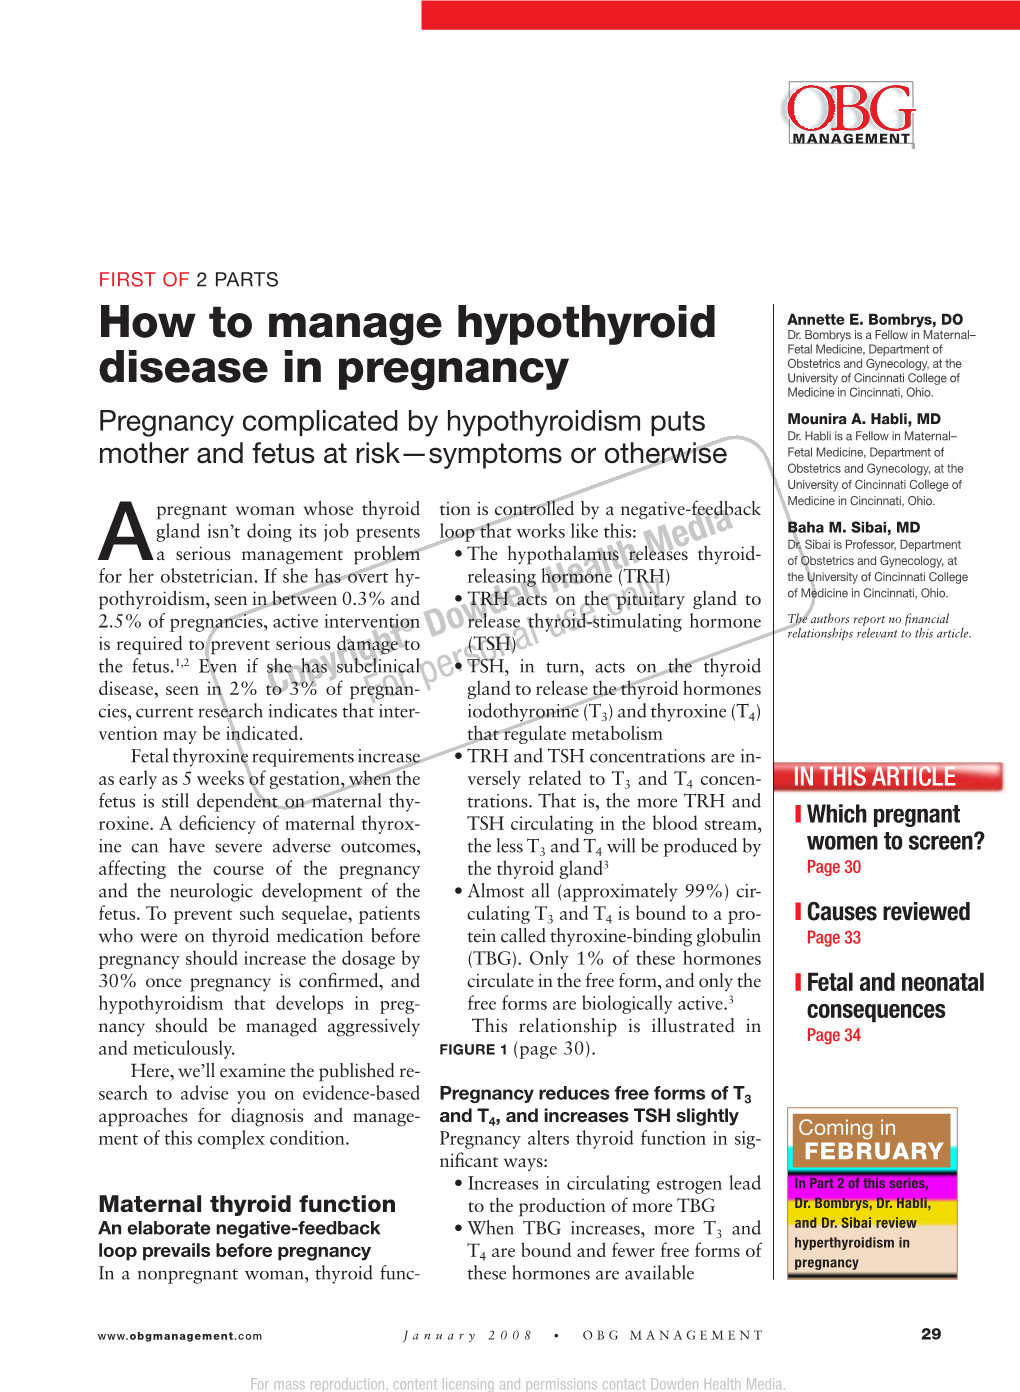 How to Manage Hypothyroid Disease in Pregnancy